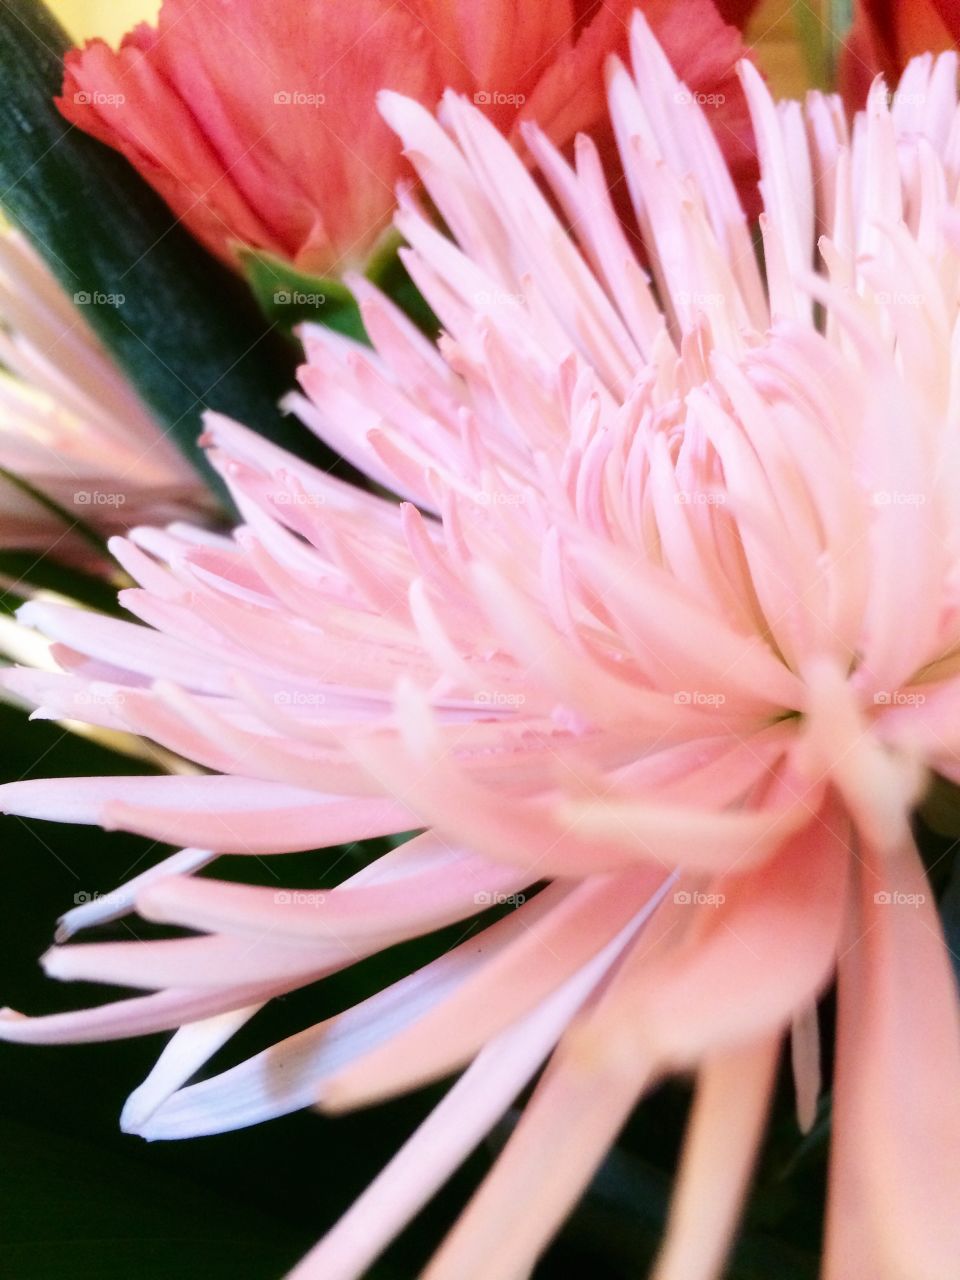 Pink flower closeup, spring photography, flower bunch image, bright colourful decoration